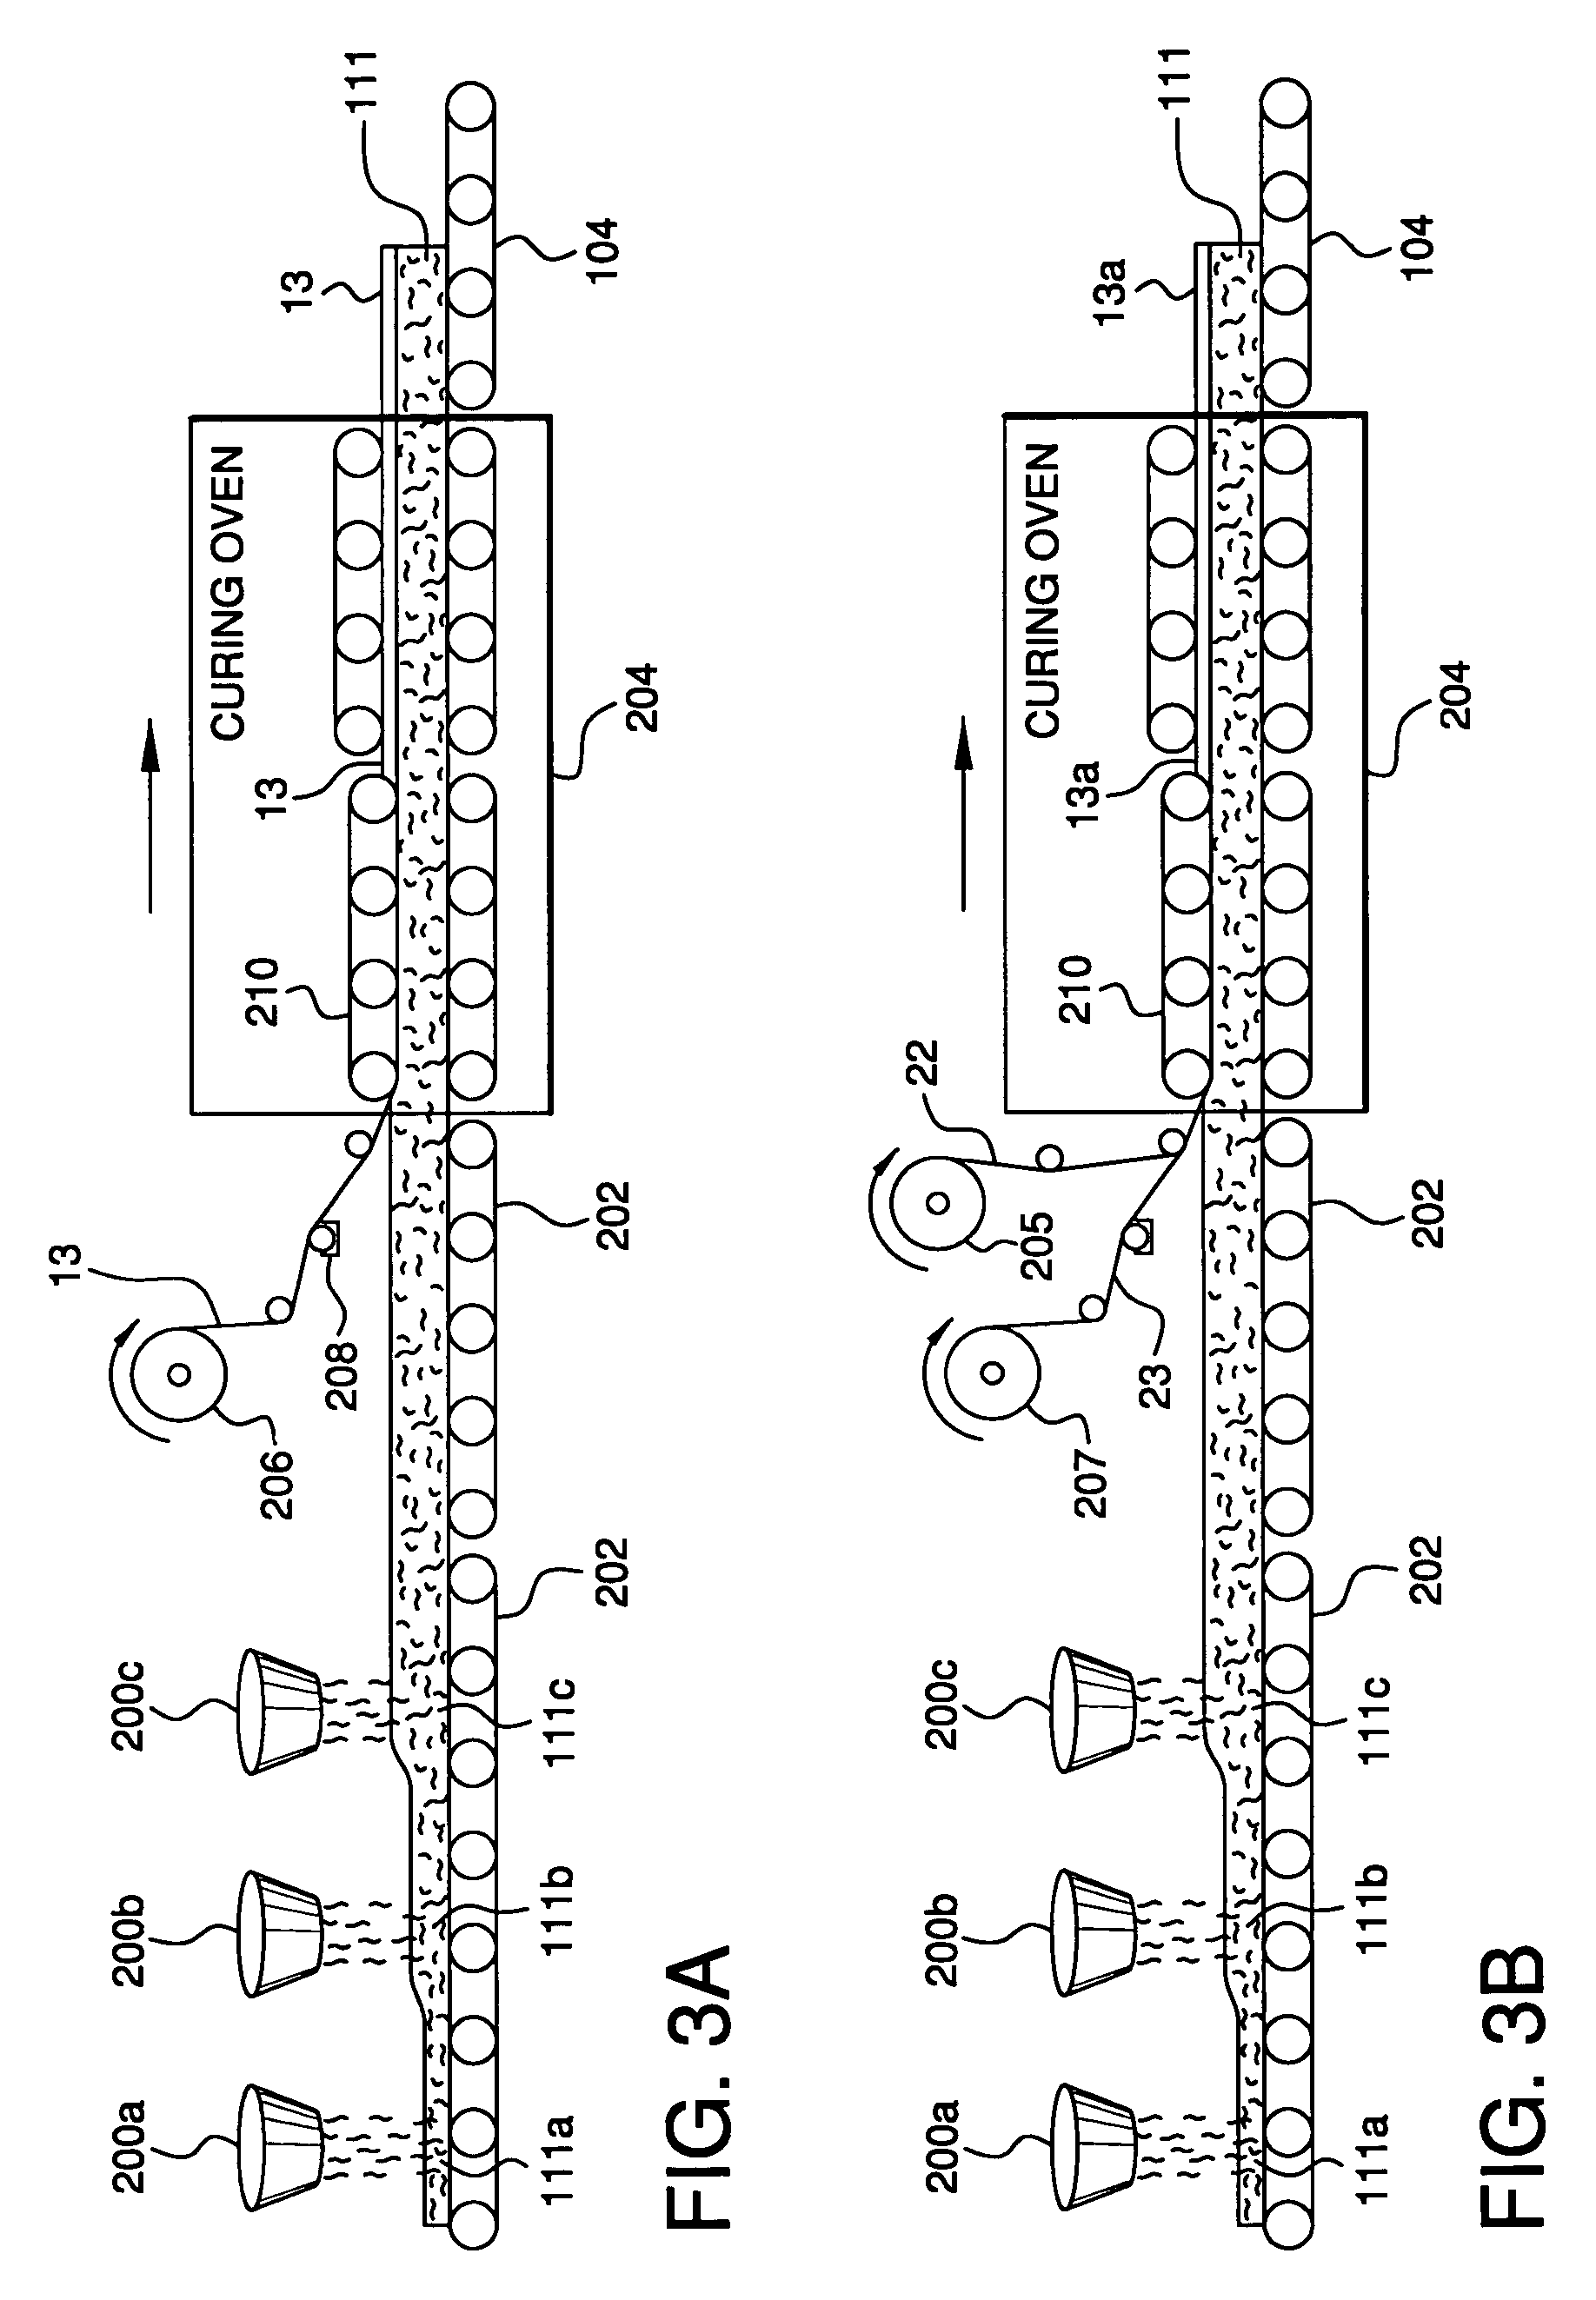 Reinforced fibrous insulation product and method of reinforcing same